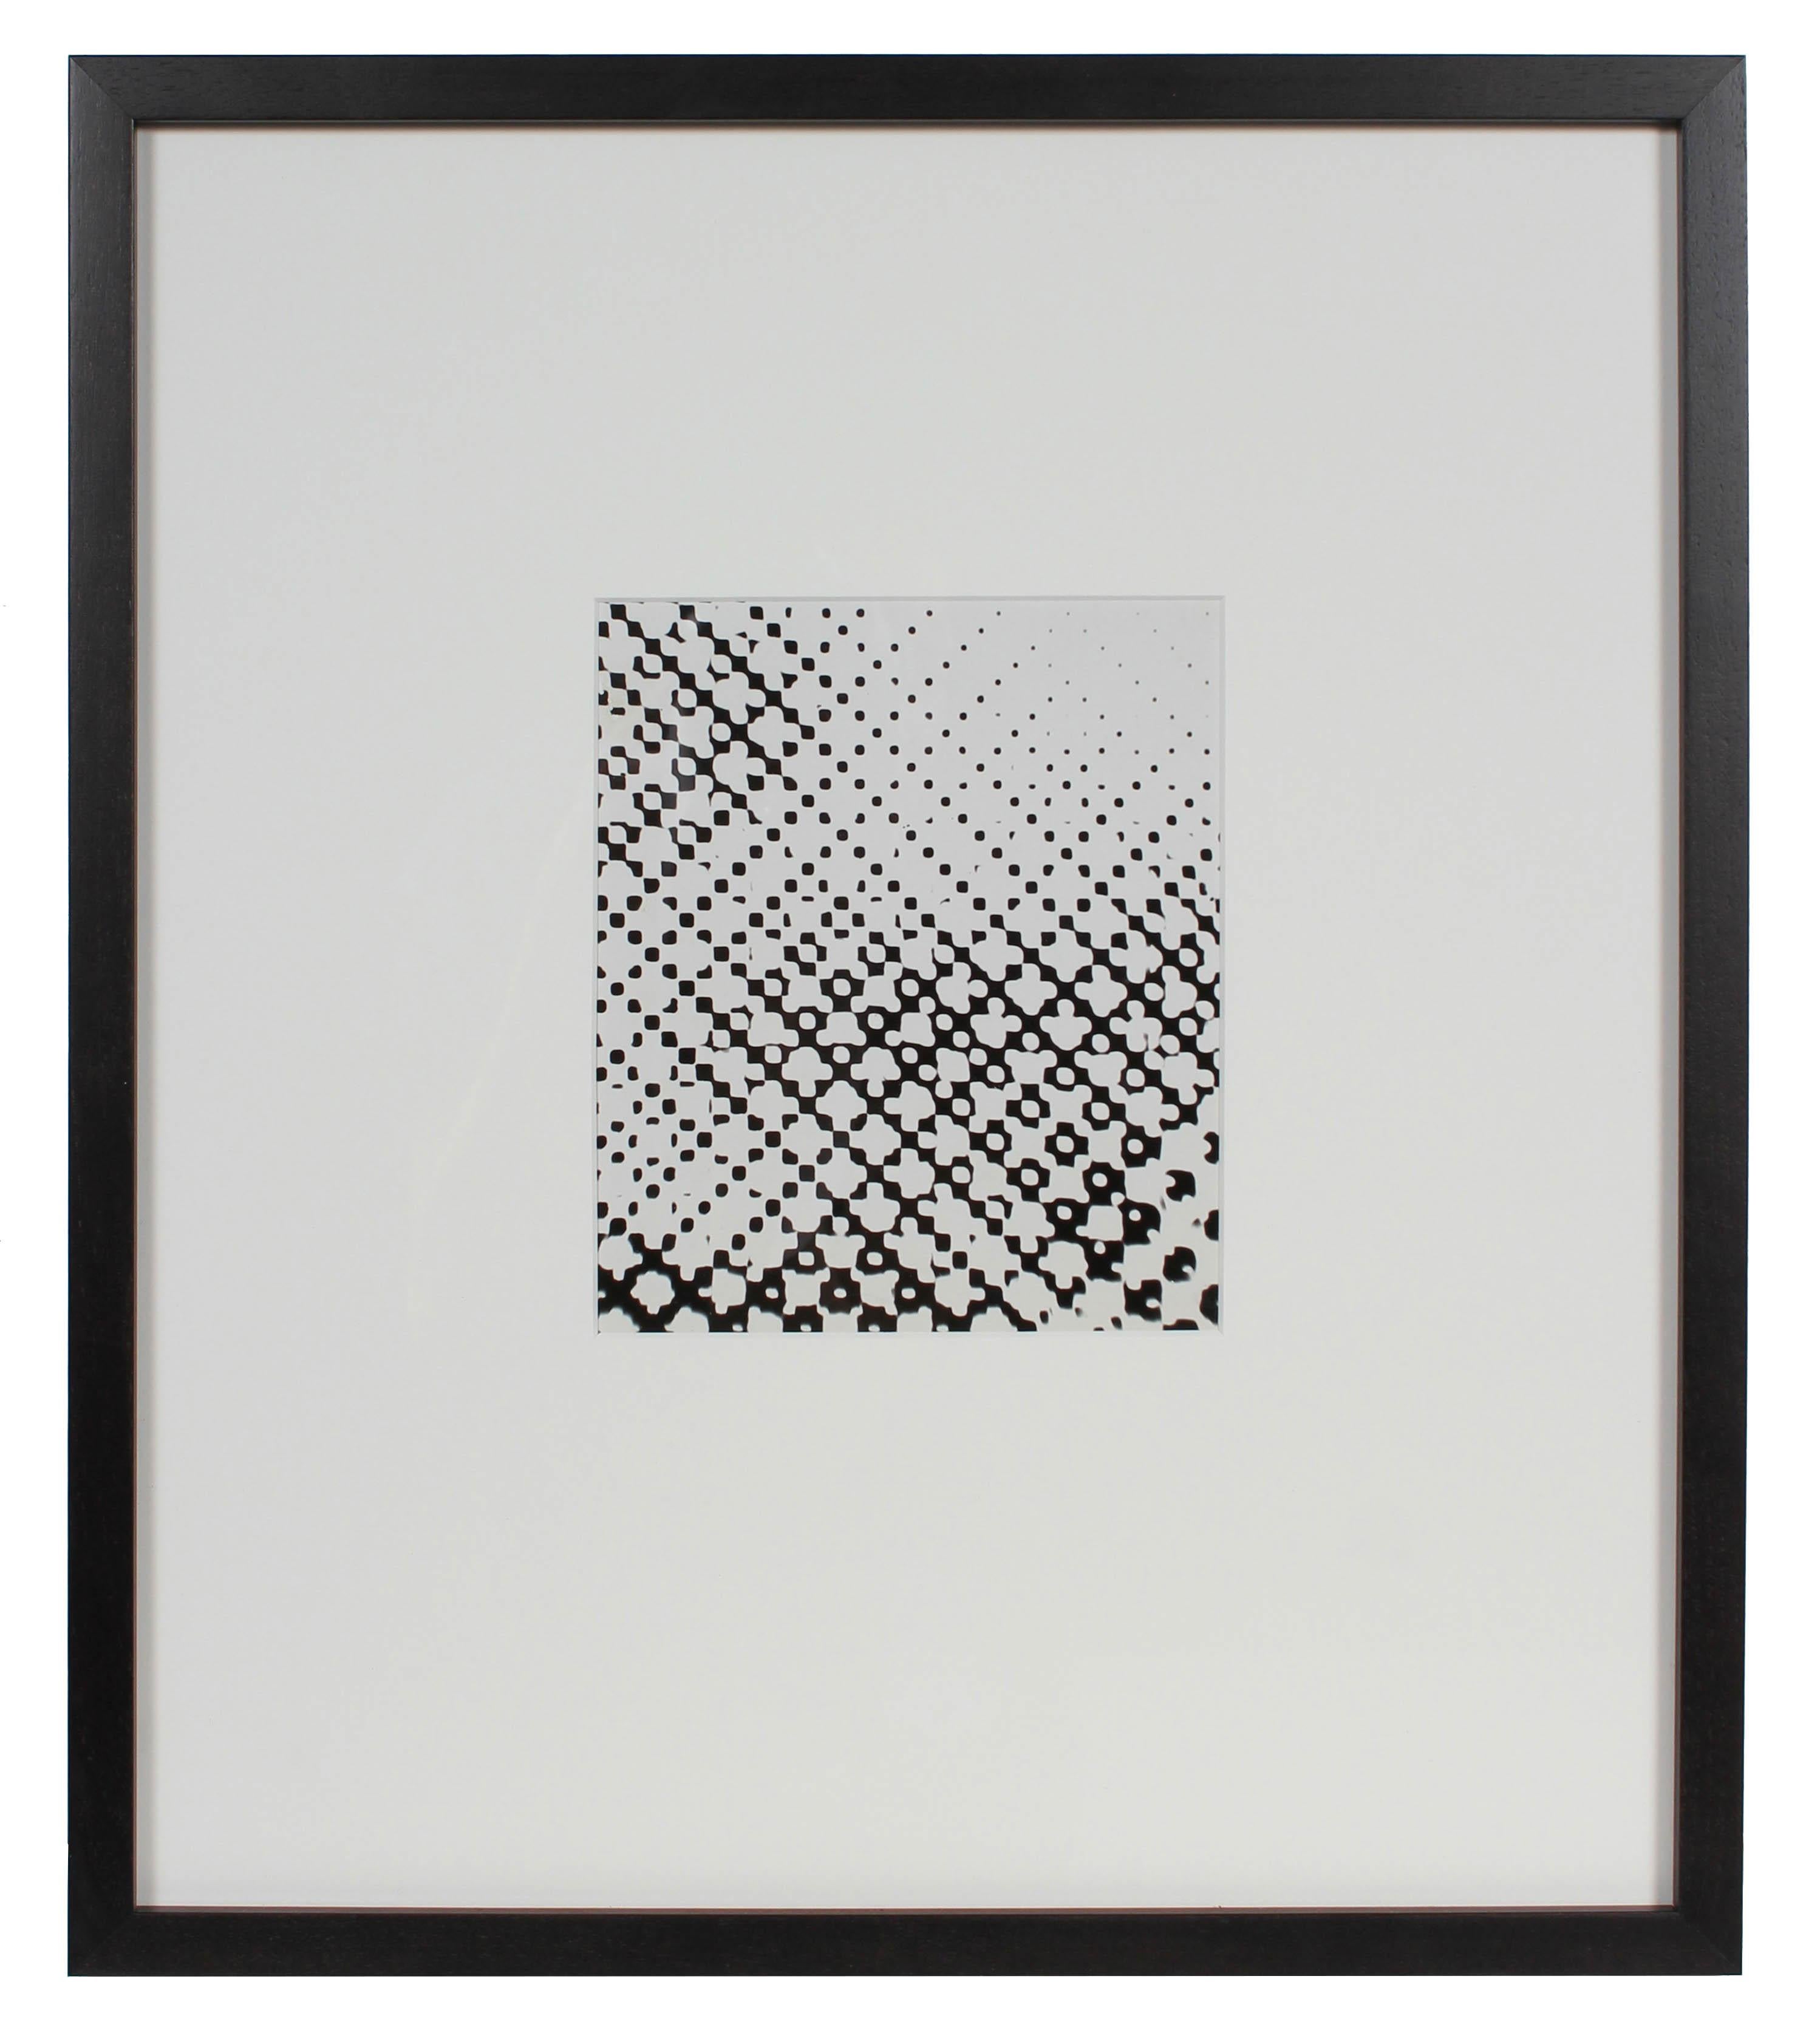 Barbara Lewis Abstract Photograph -  "Super Exposed Dot Screen", American Modern B&W Monochromatic Photograph, 1969